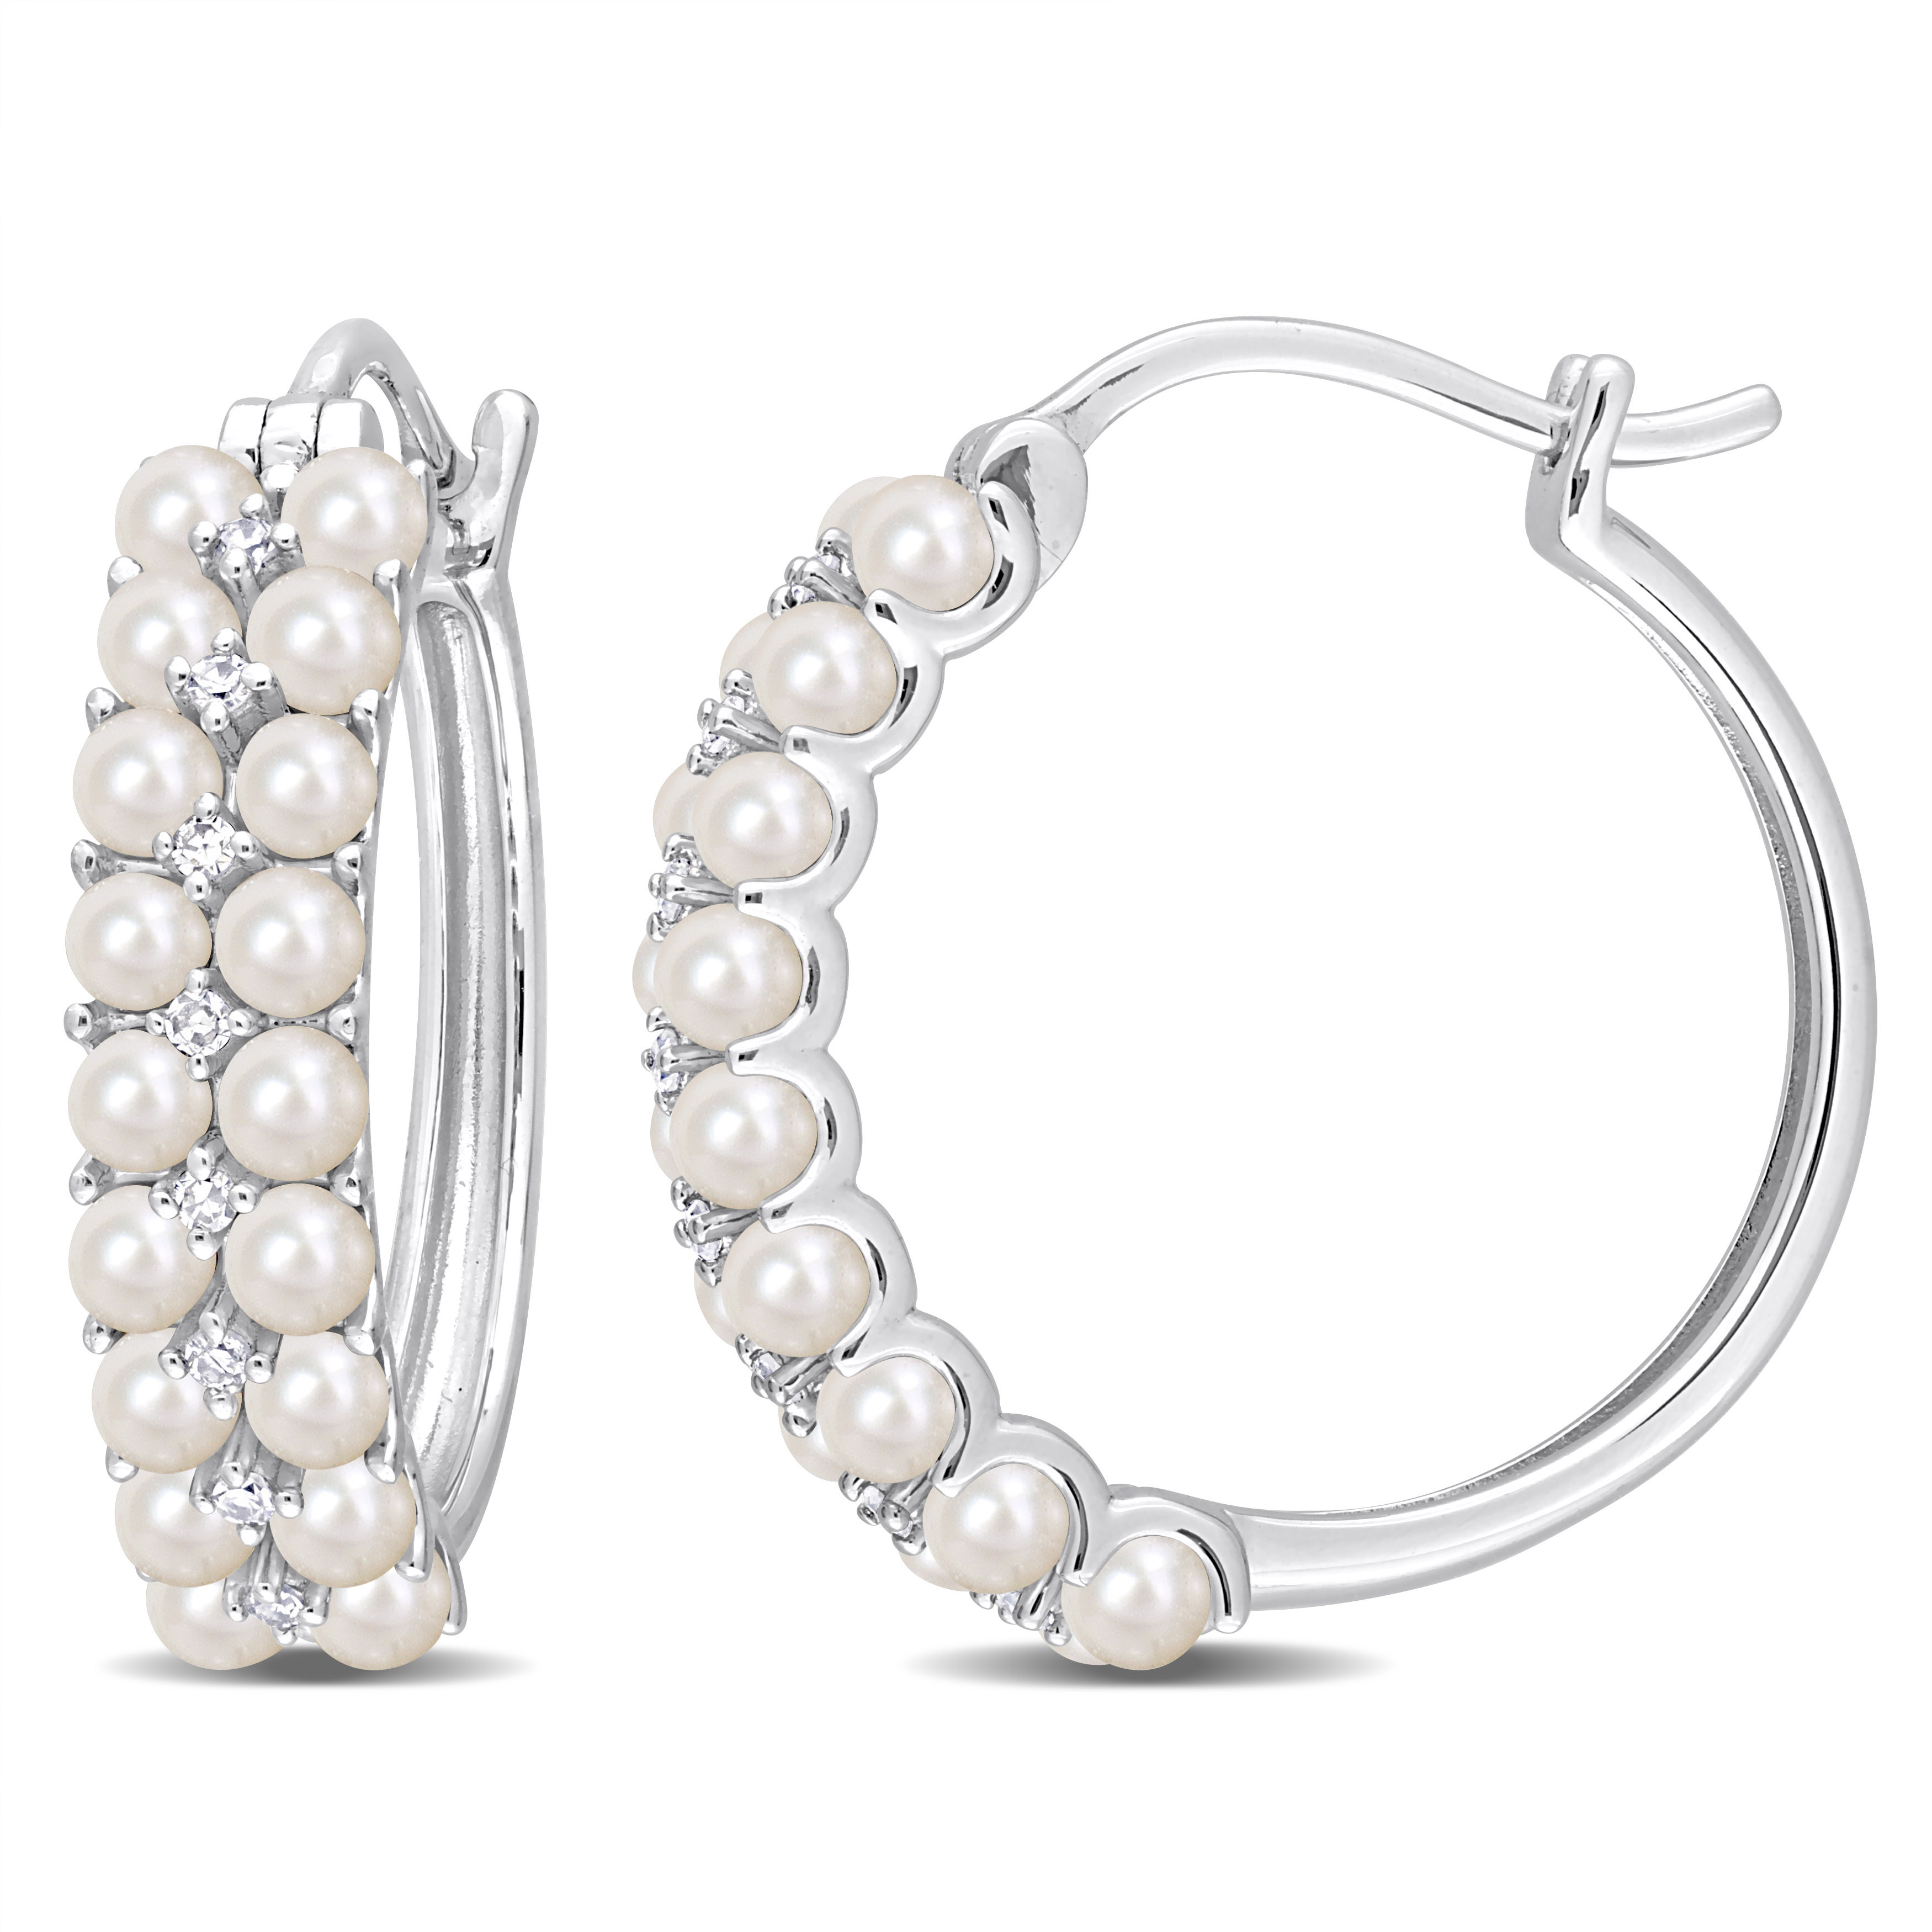 2 - 2.5 MM White Cultured Freshwater Pearl and 1/10 CT TDW Diamond Multi-row Hoop Earrings in 14k White Gold